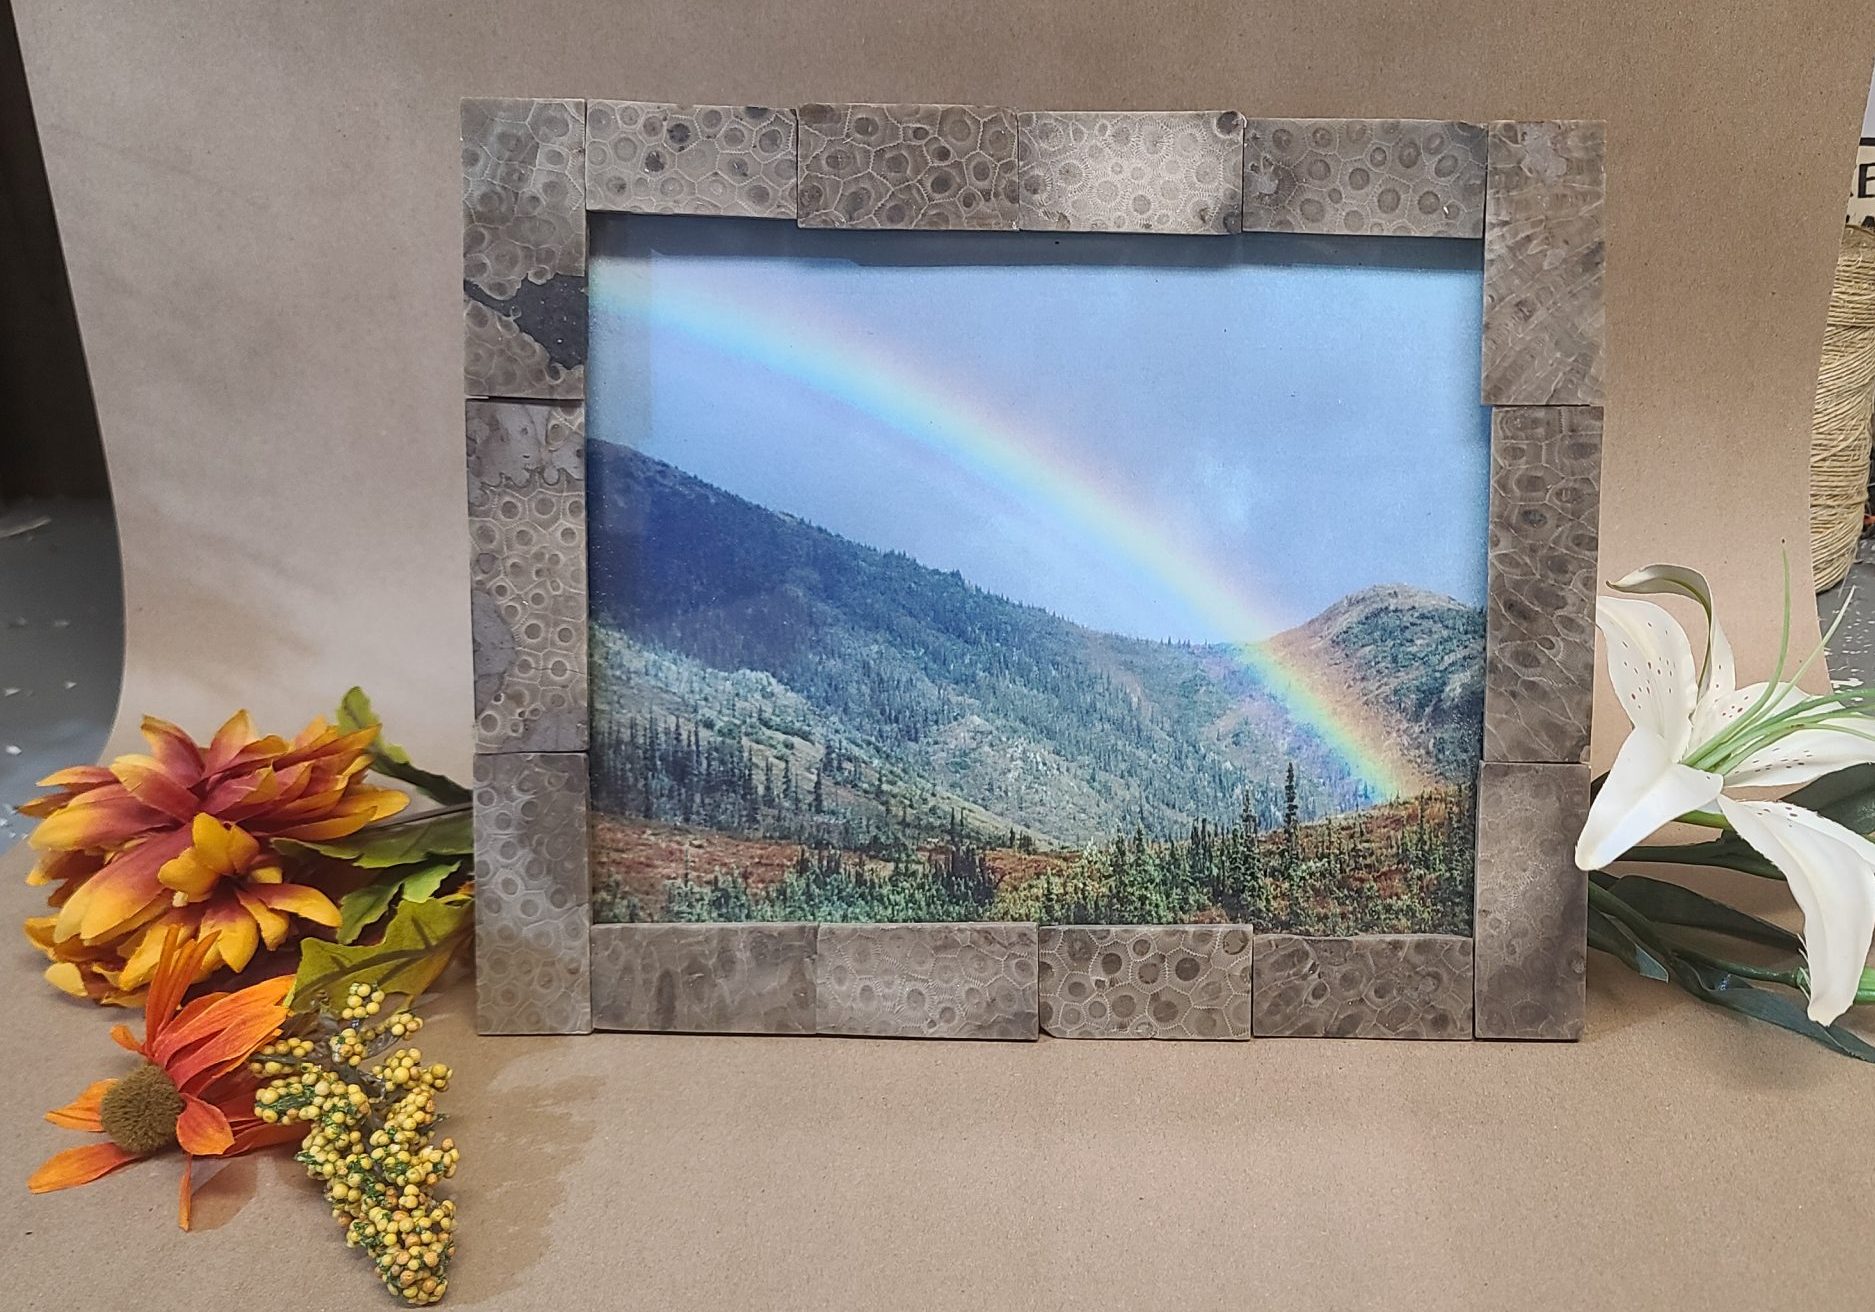 8 x 10 petoskey stone picture frame